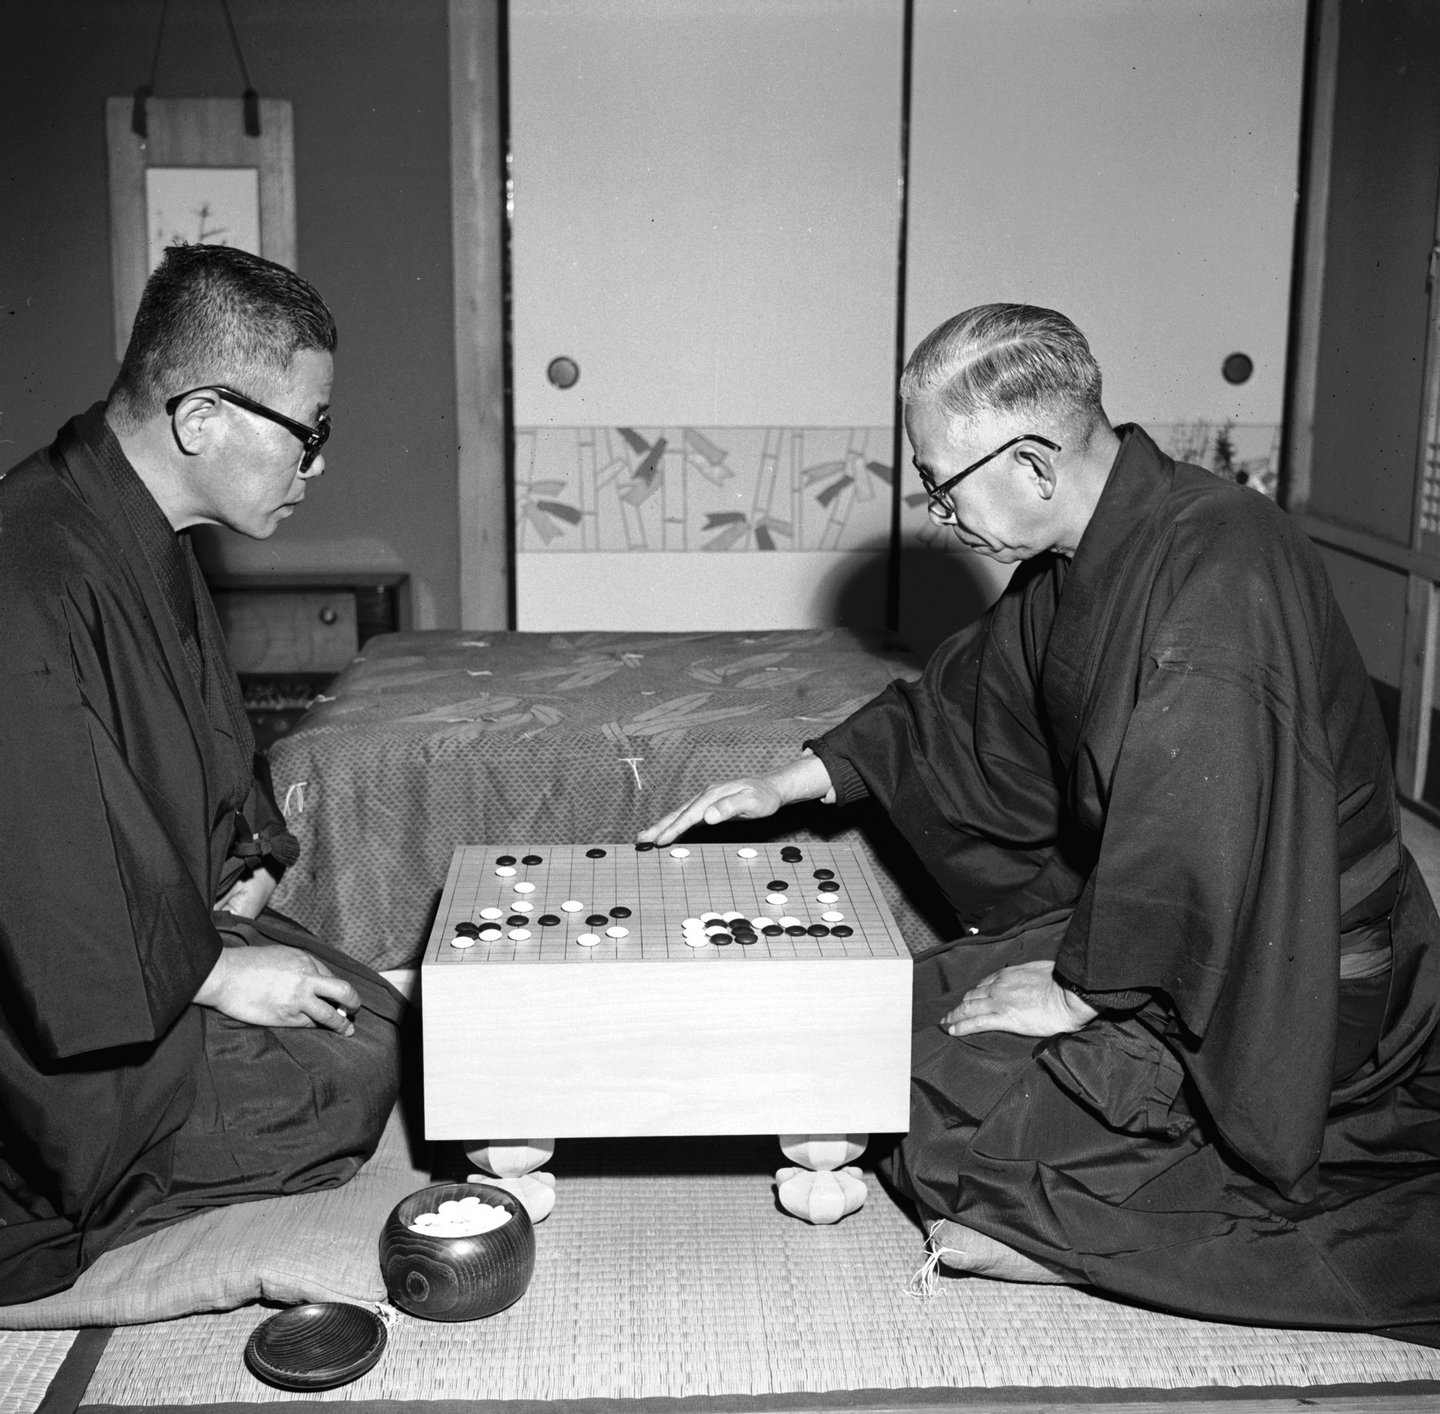 circa 1955: Joju Oda playing a game of Go with a fellow member of the Rotary Club in Nara, Japan. (Photo by Orlando /Three Lions/Getty Images)